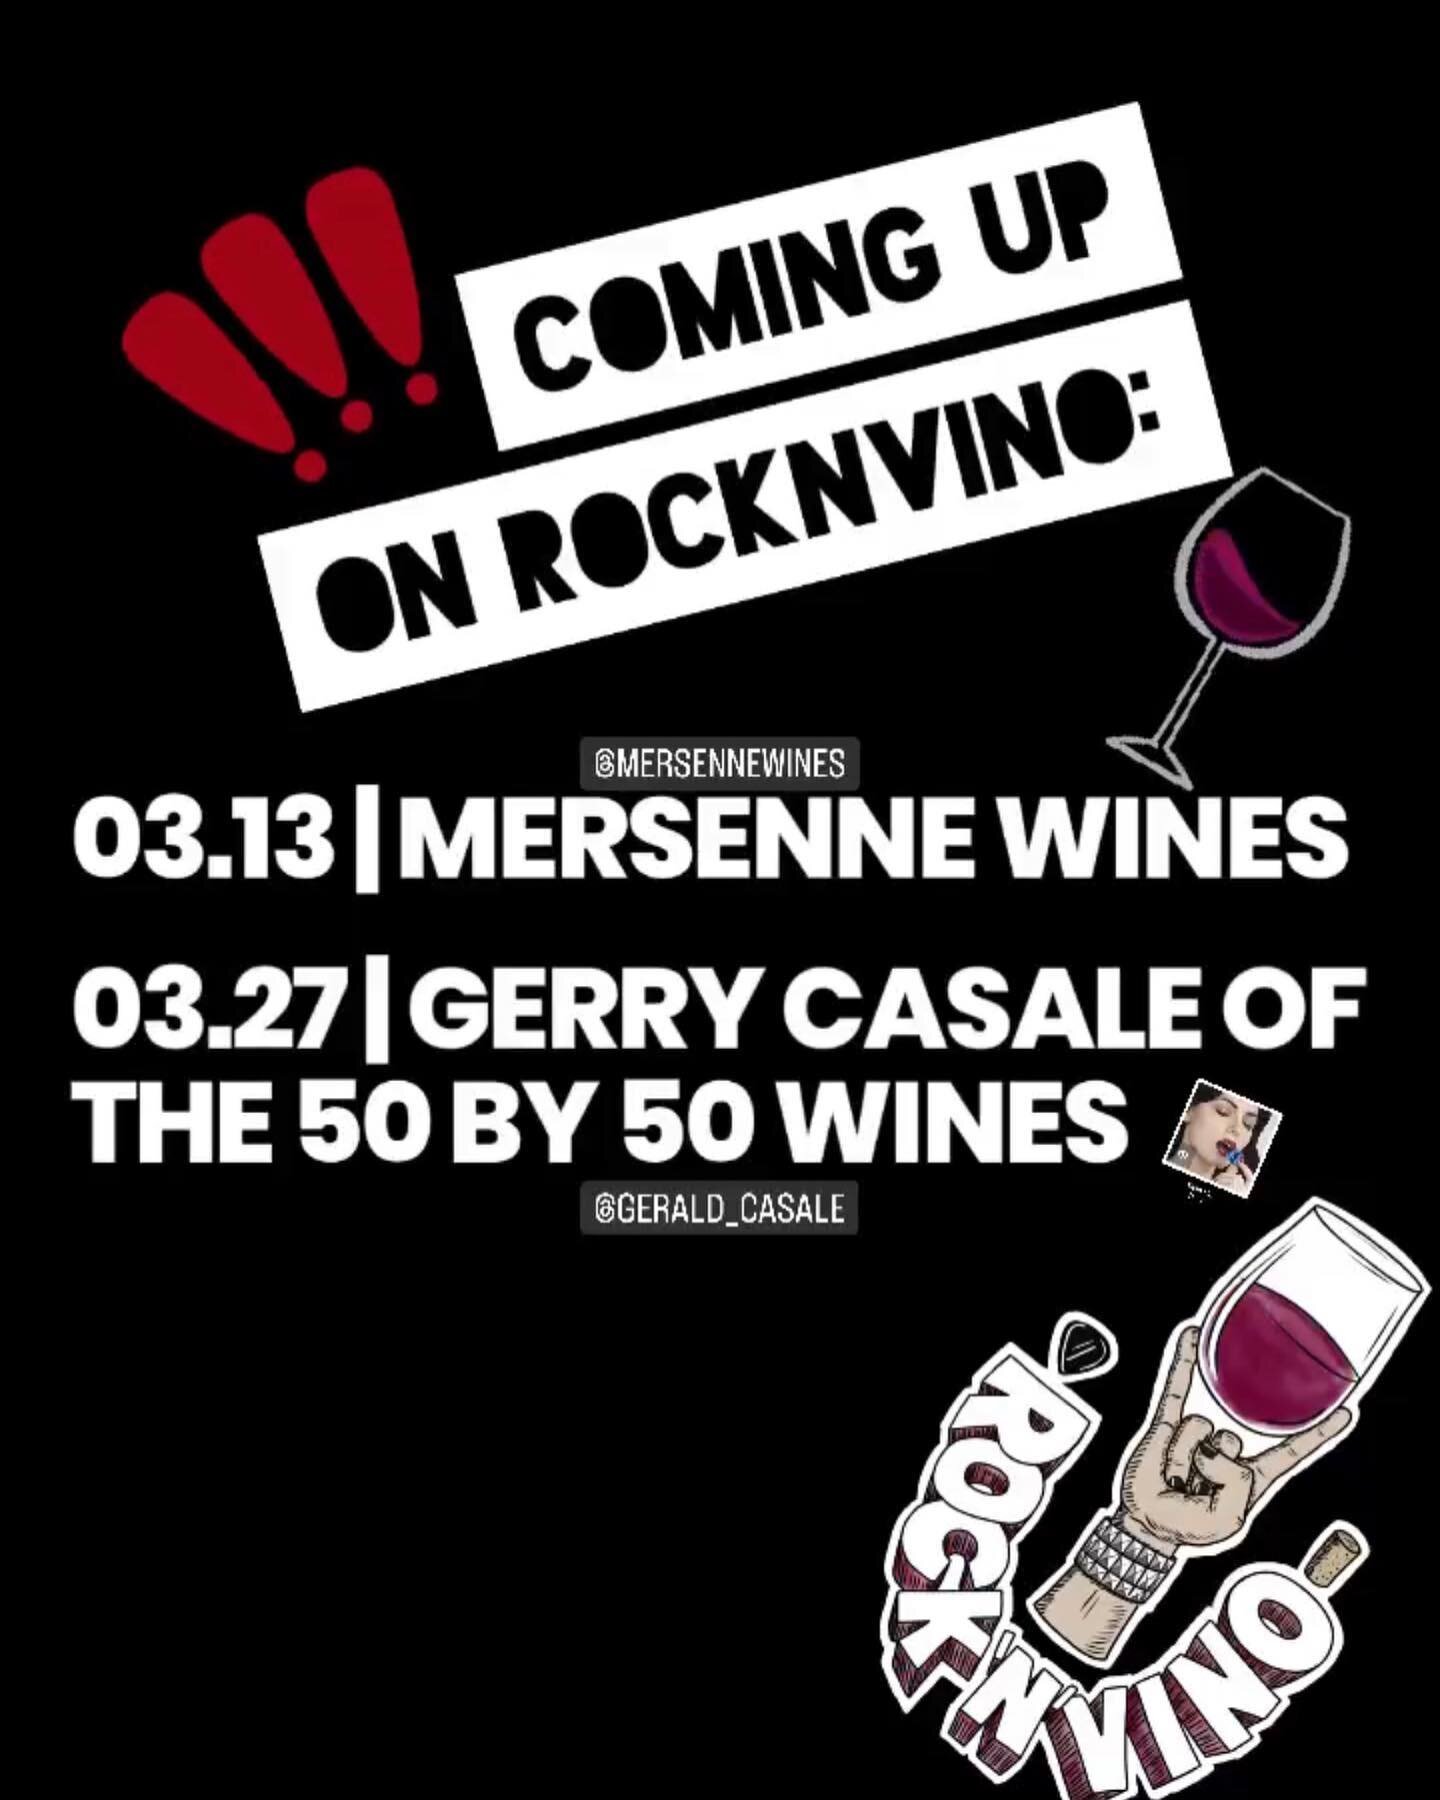 Coming up on ROCKnVINO we&rsquo;ve got some great guests! 

3.13 @mersennewines 
3.27 @gerald_casale of The 50 By 50 Wines

Send us your questions and tell us who you want to see on the show in the future. 

Tune in live on @ksro1350 at Noon and chec